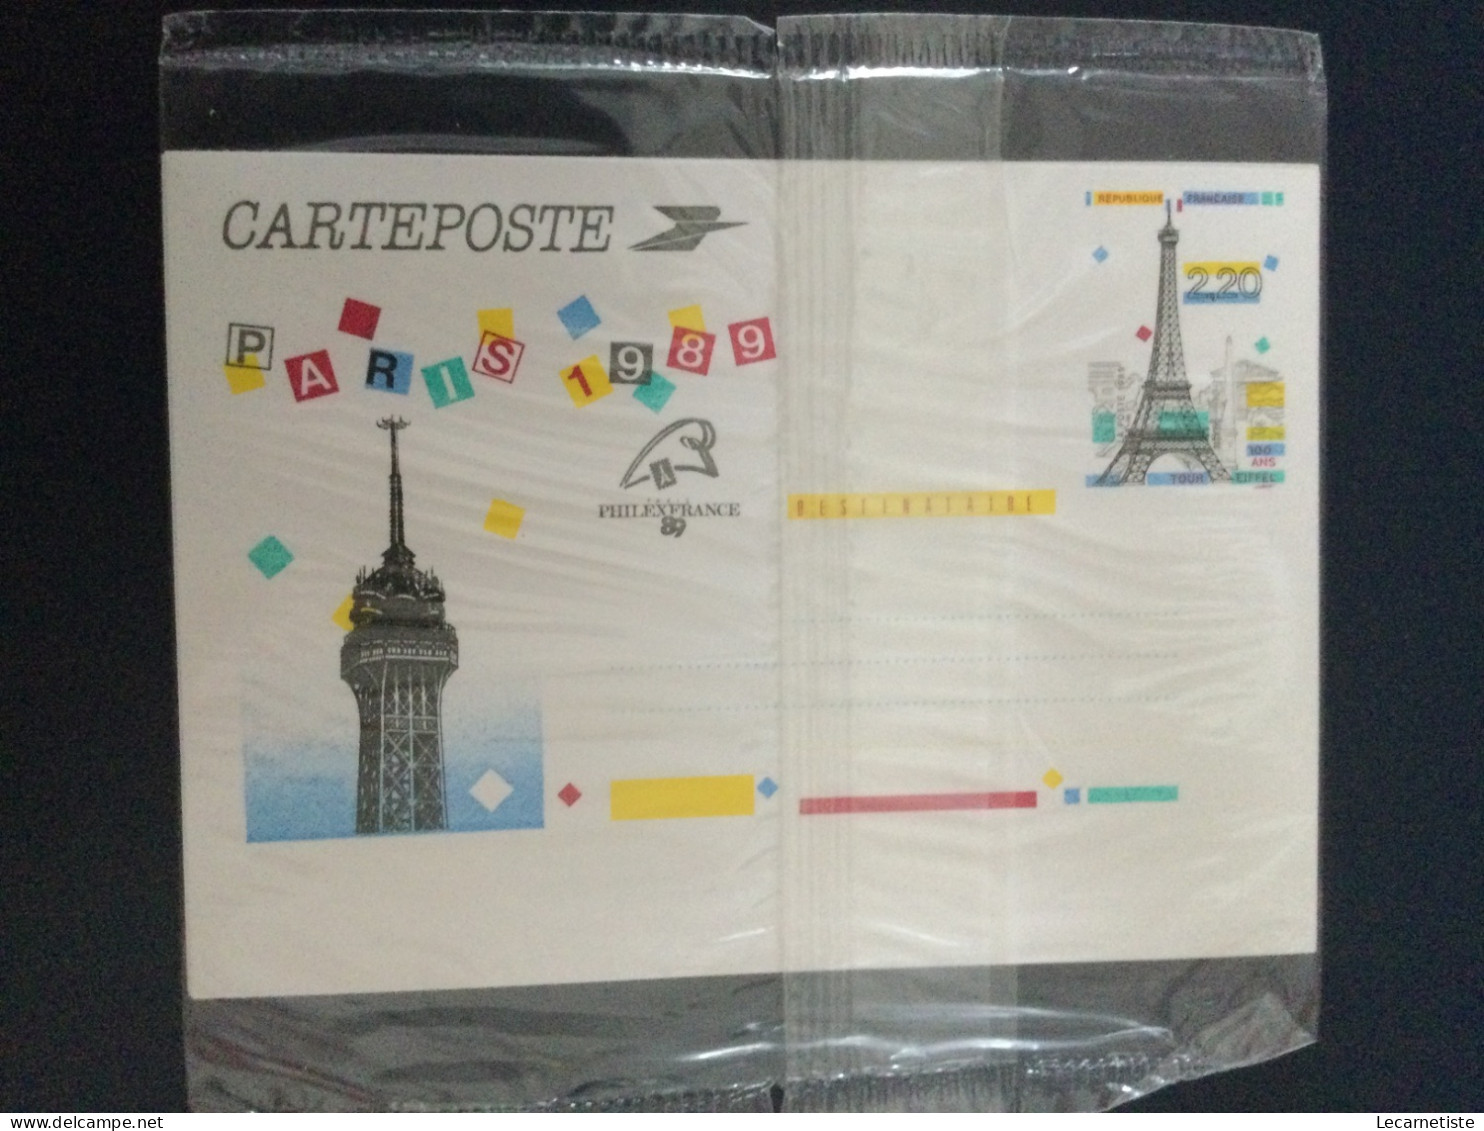 5 Cartes Postales Carteposte 1989 Sous Blister - Collections & Lots: Stationery & PAP